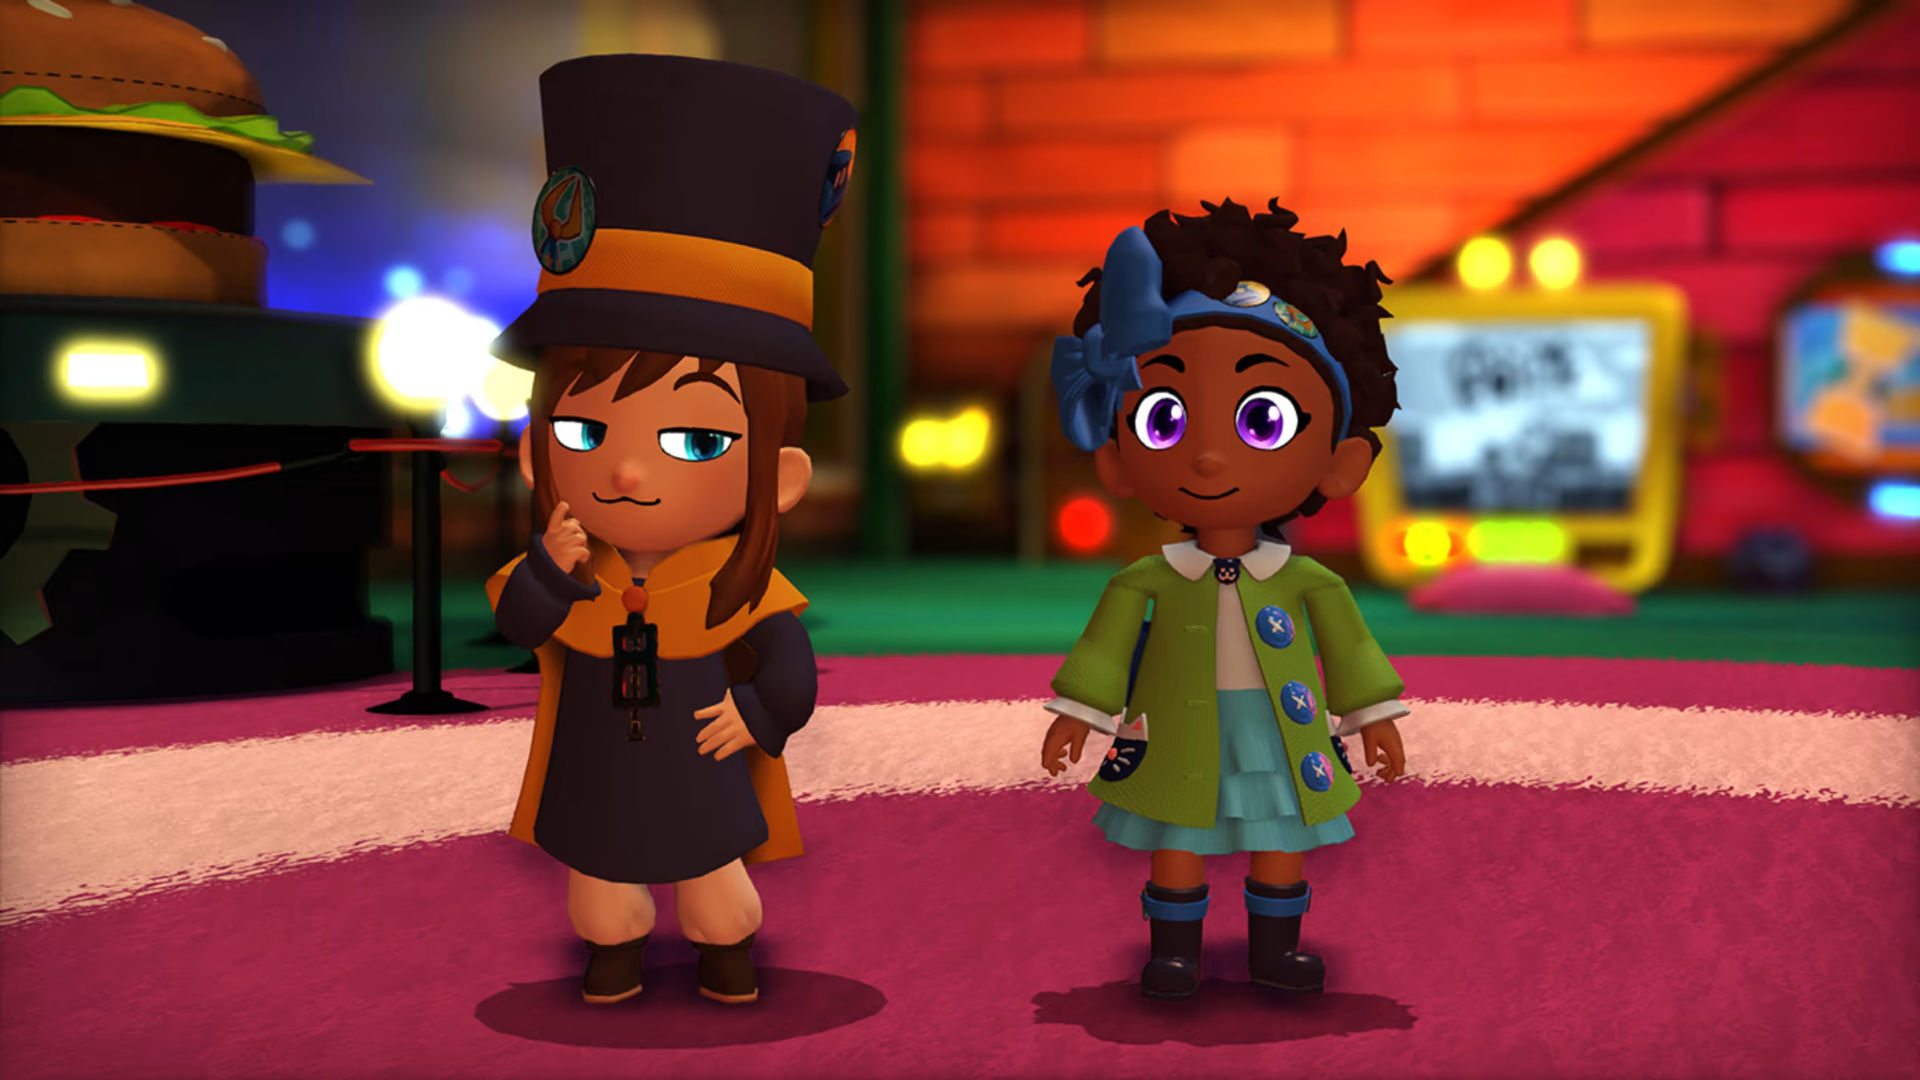 Hat Kid and Bow Kid from A Hat in Time stood in a red room